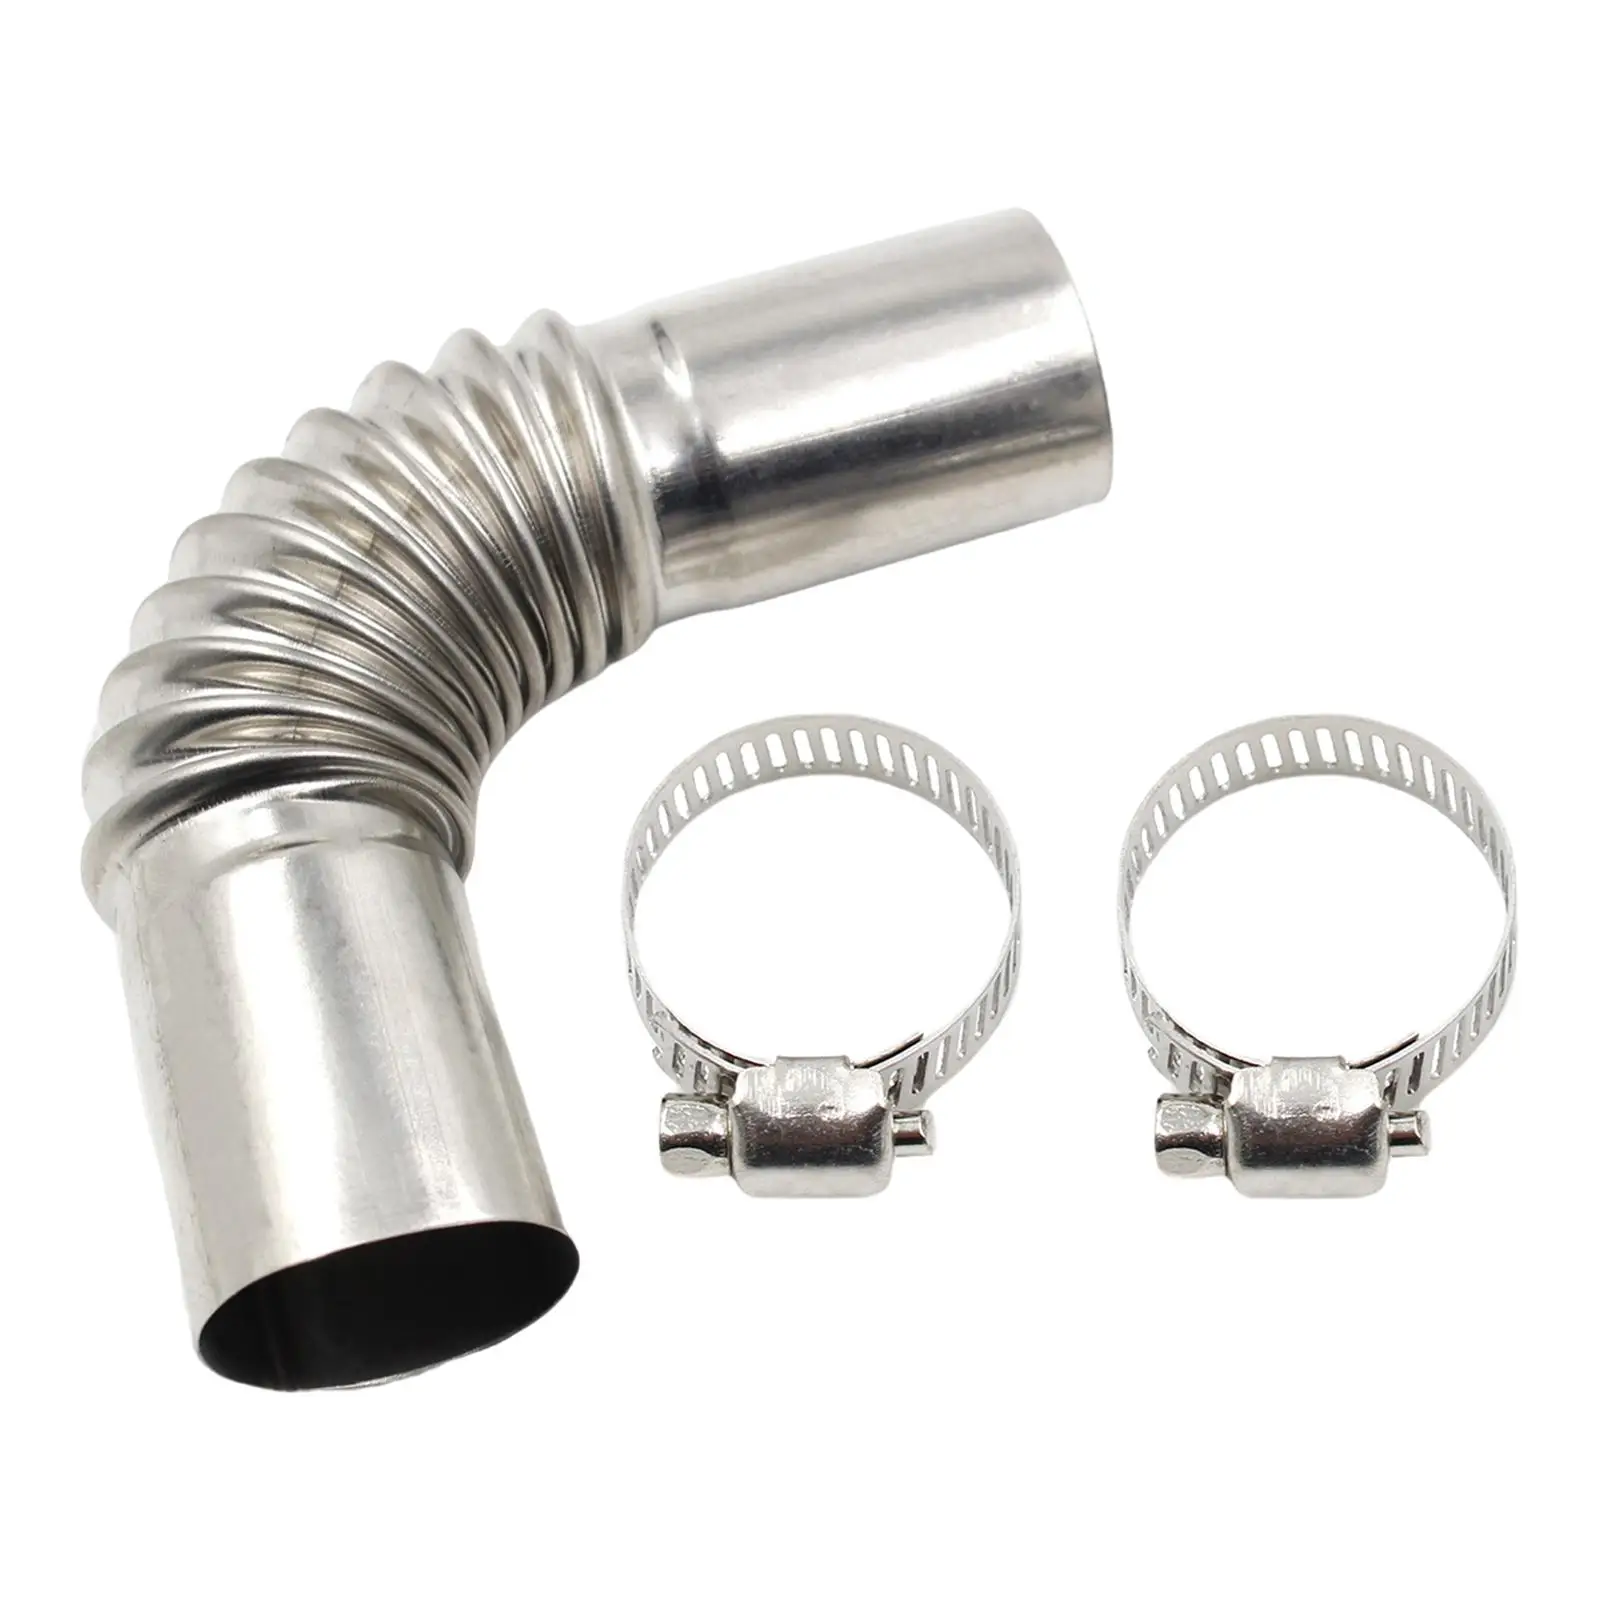 24mm Exhaust Tube Elbow Connector 27mm Od, 25mm ID, Air Exhaust s Connector , W/ Clamps